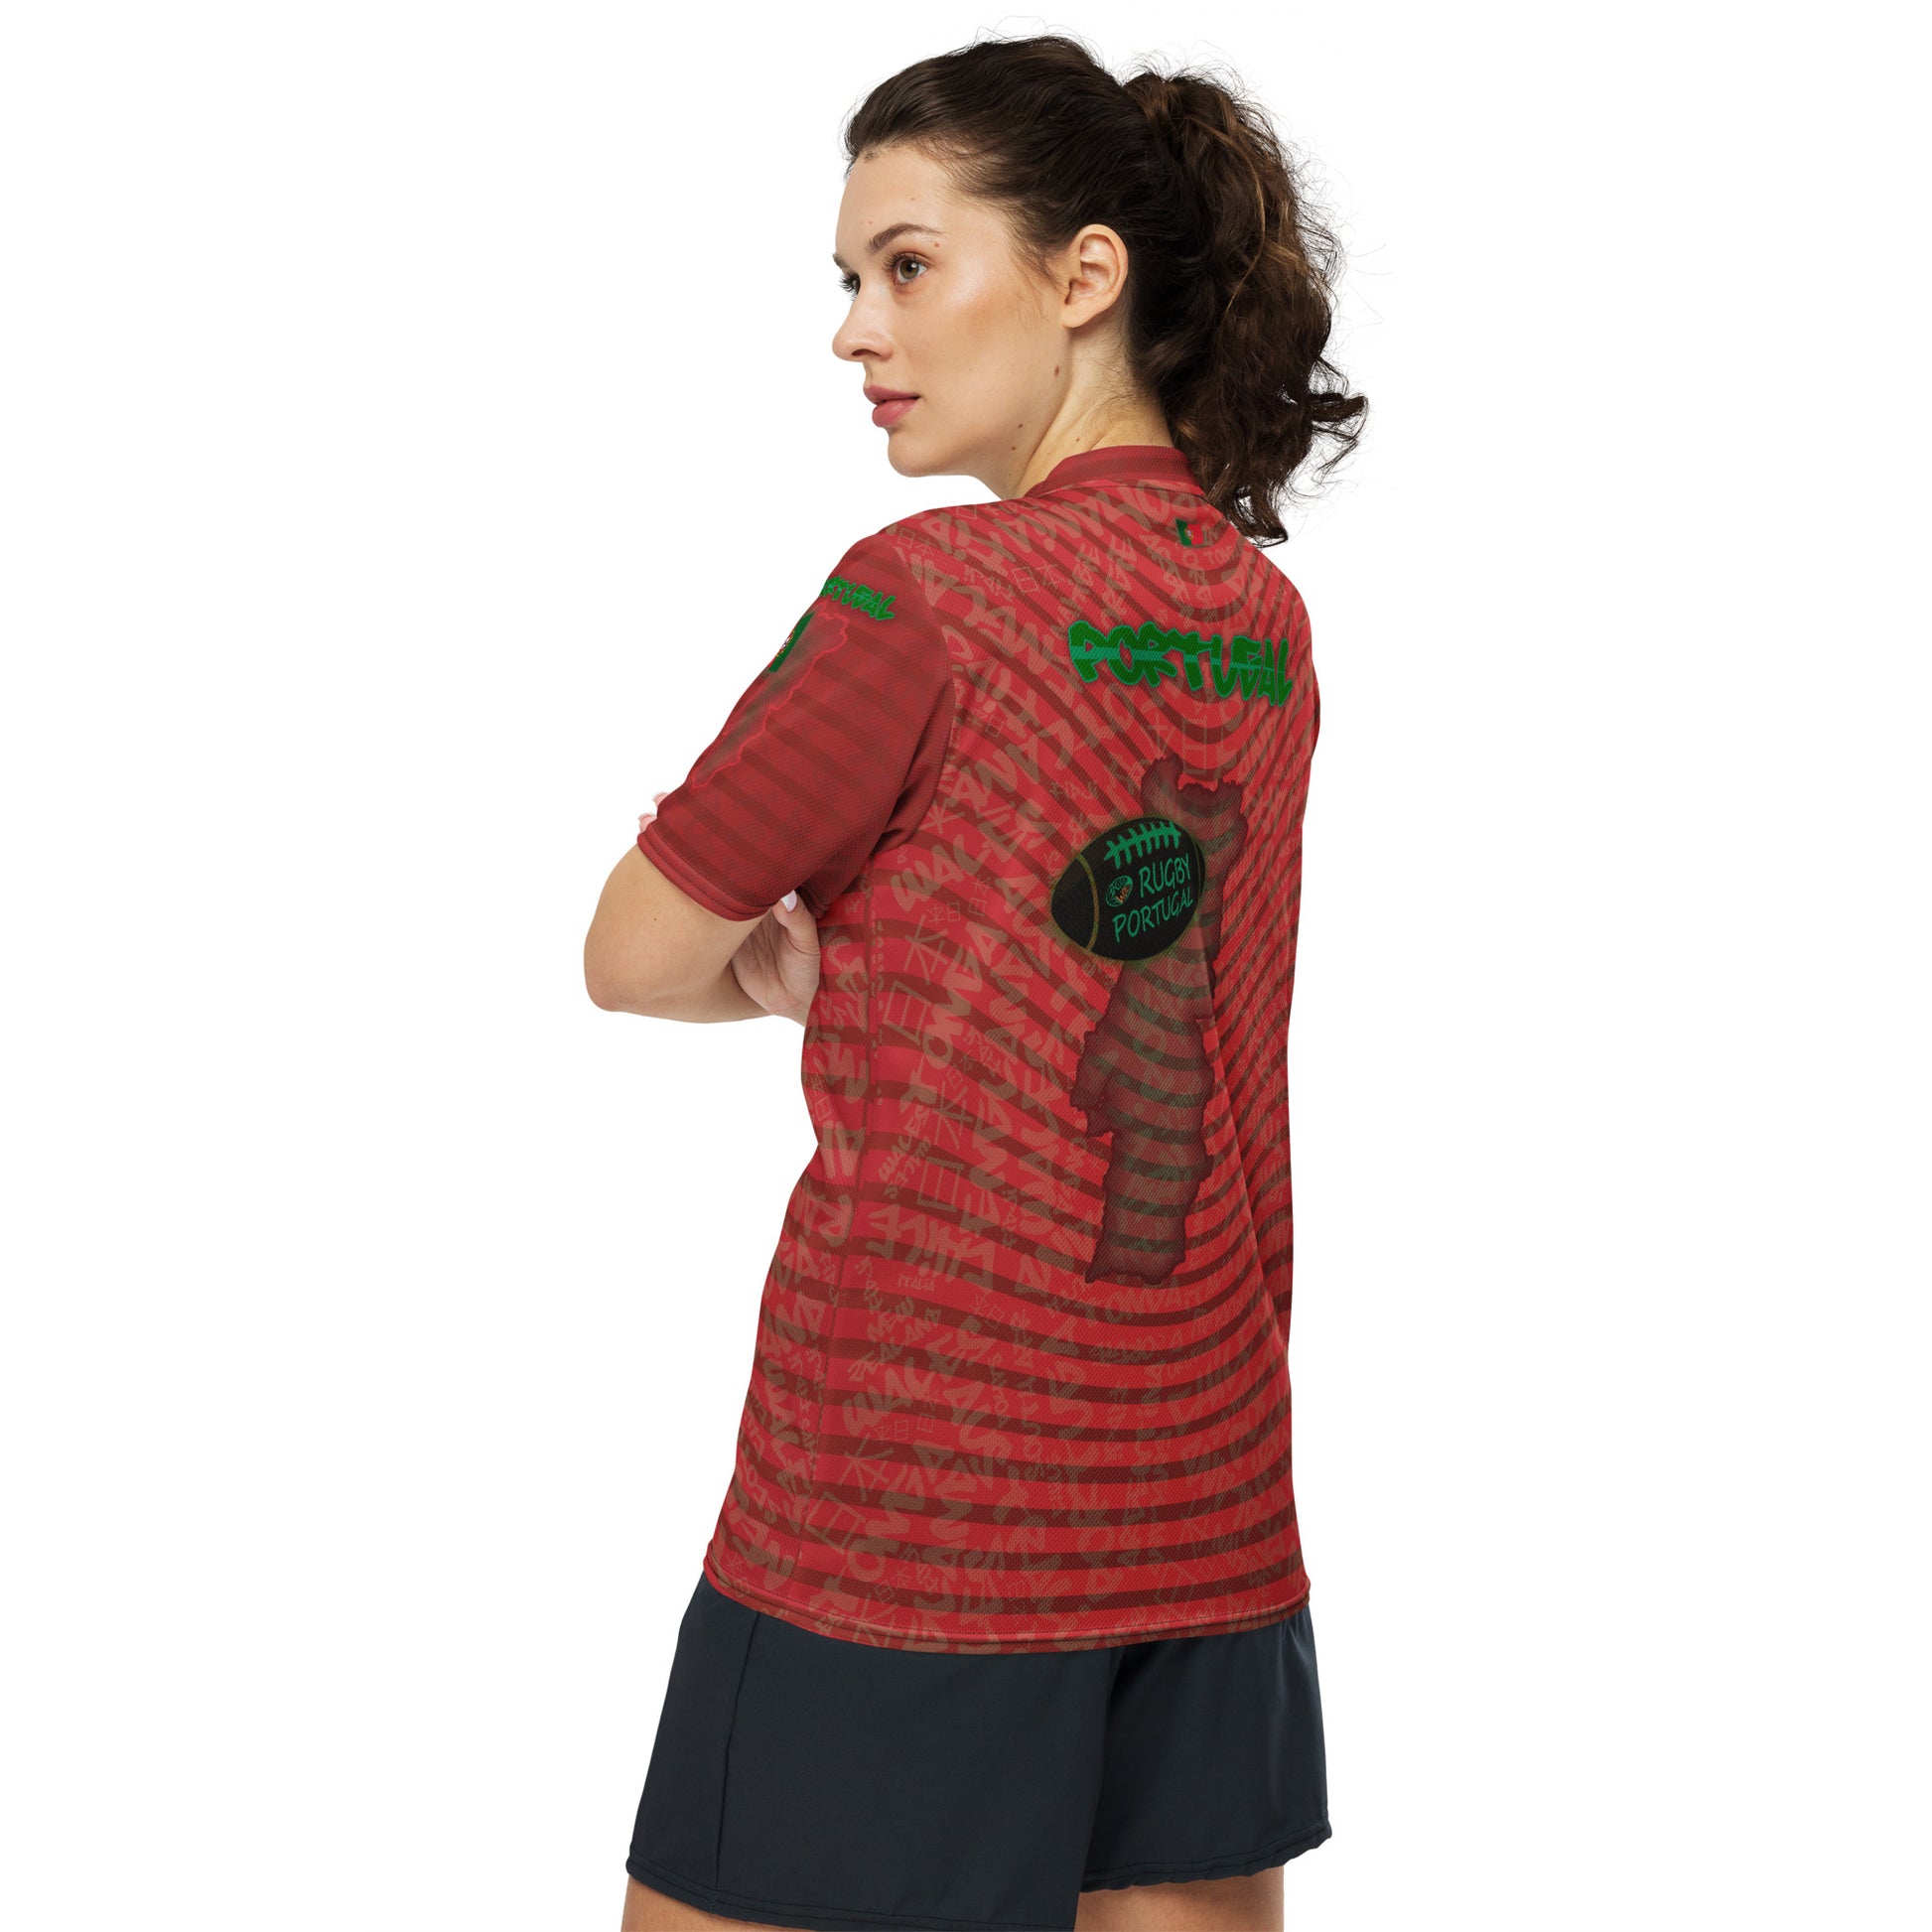 t-shirt jomelo rugby Portugal